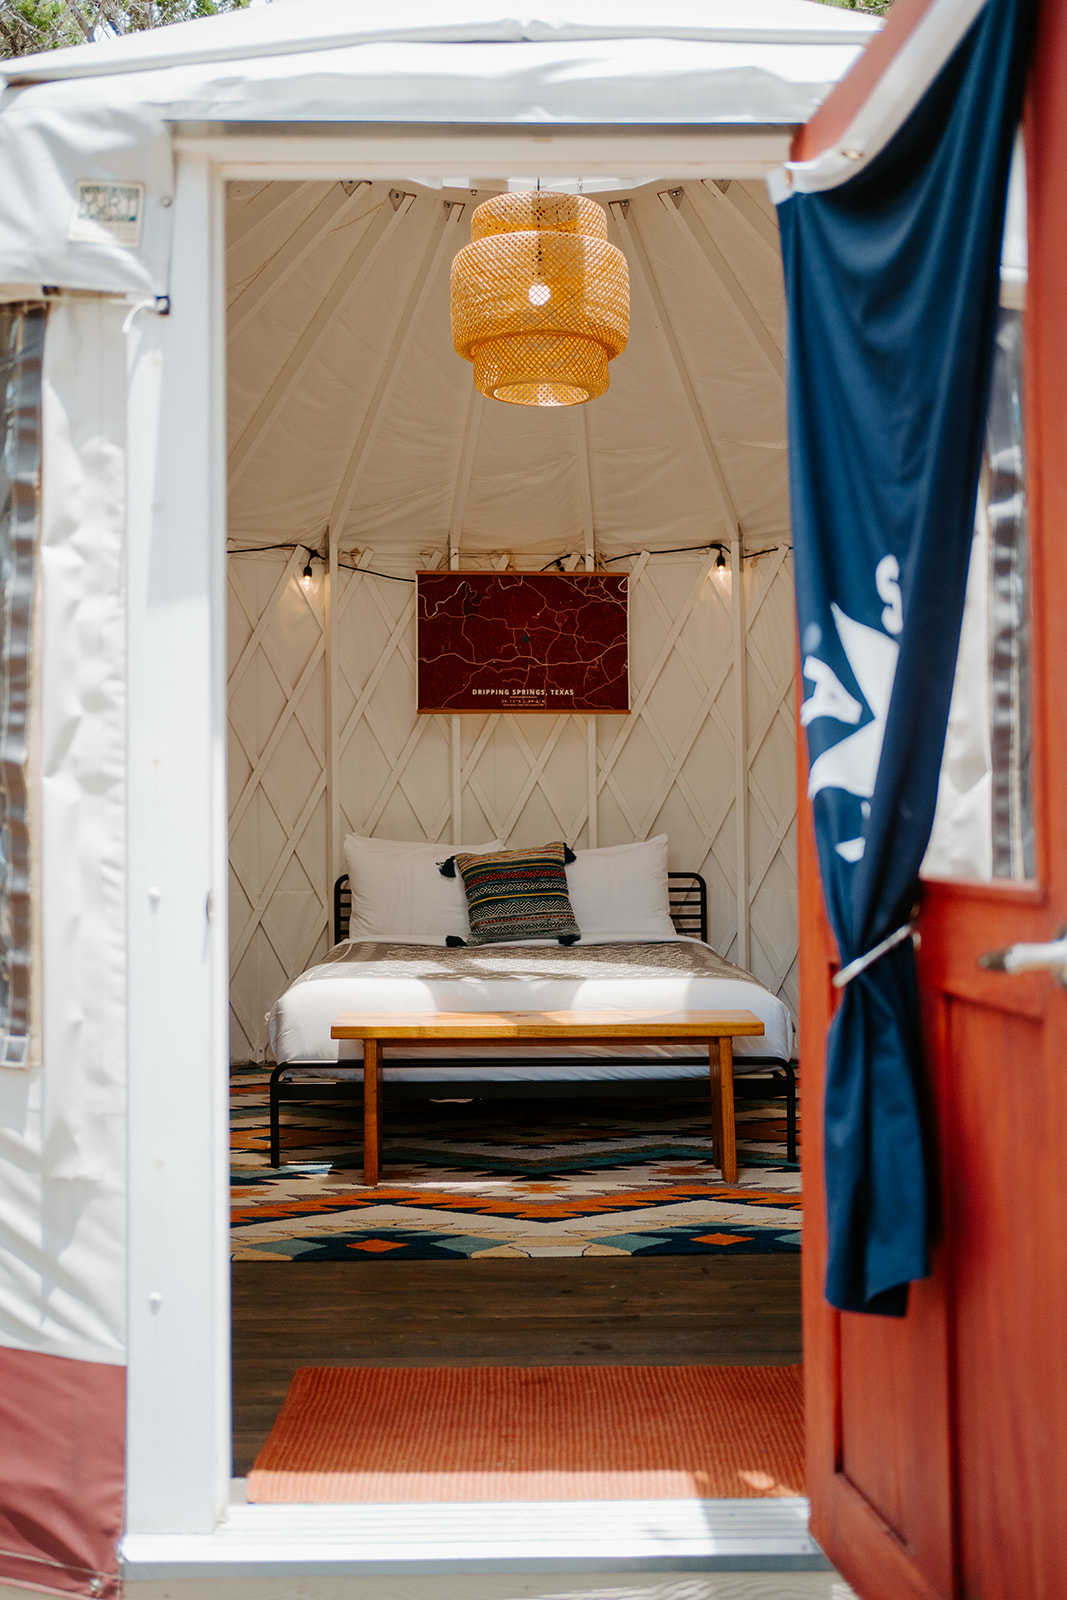 Glamping options offer hotel-like amenities, including a comfy bed in a yurt. Photo courtesy of Lucky Arrow Retreats.